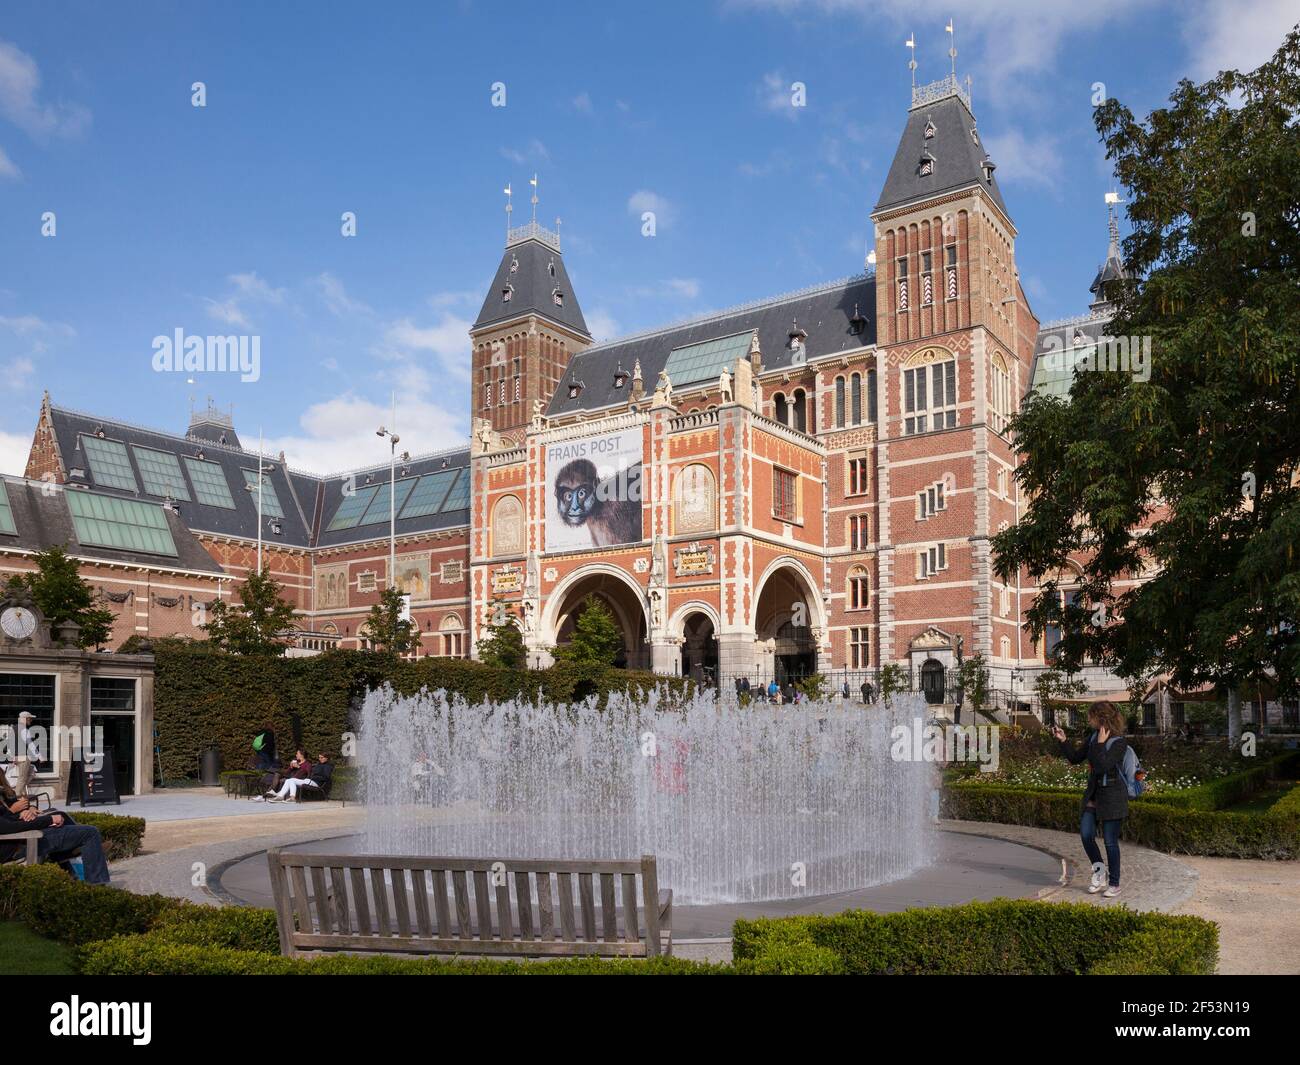 Geographie / Reisen, Niederlande, Holland, Amsterdam, Rijksmuseum, Additional-Rights-Clearance-Info-Not-Available Stockfoto